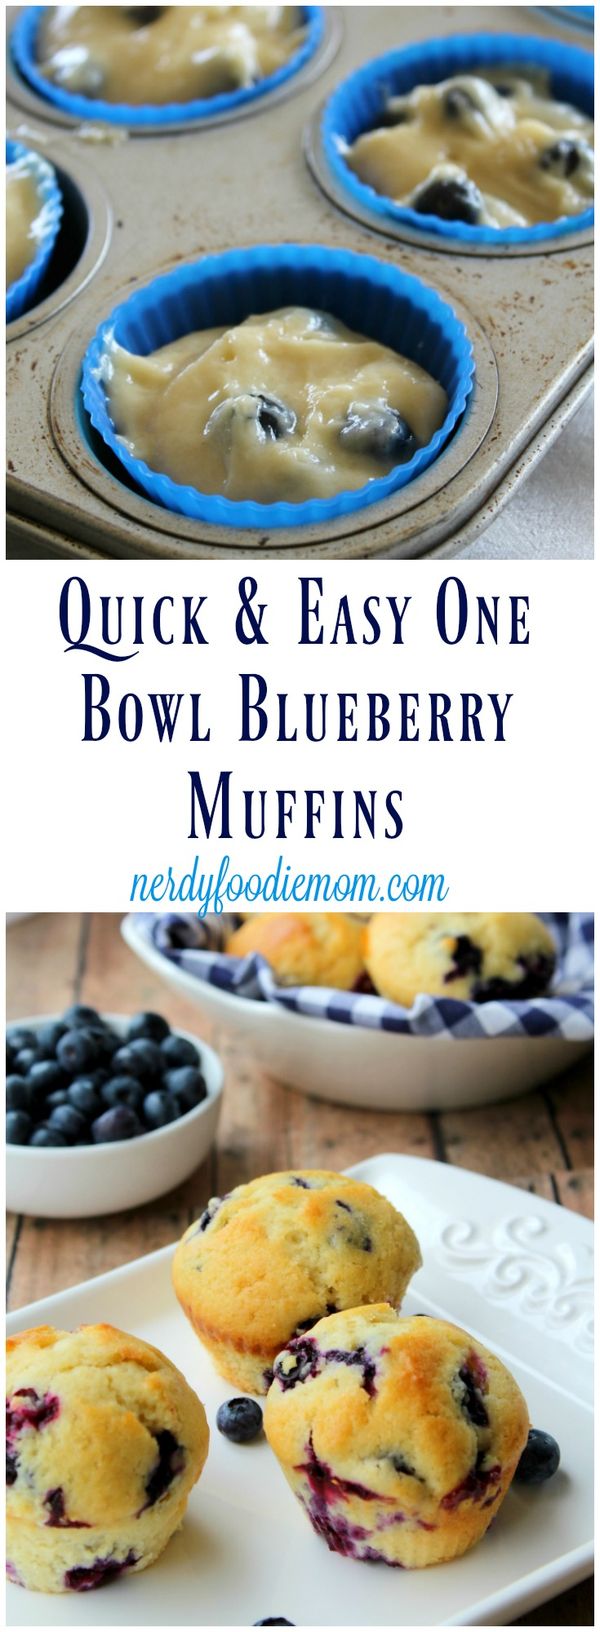 Quick & Easy One Bowl Blueberry Muffins